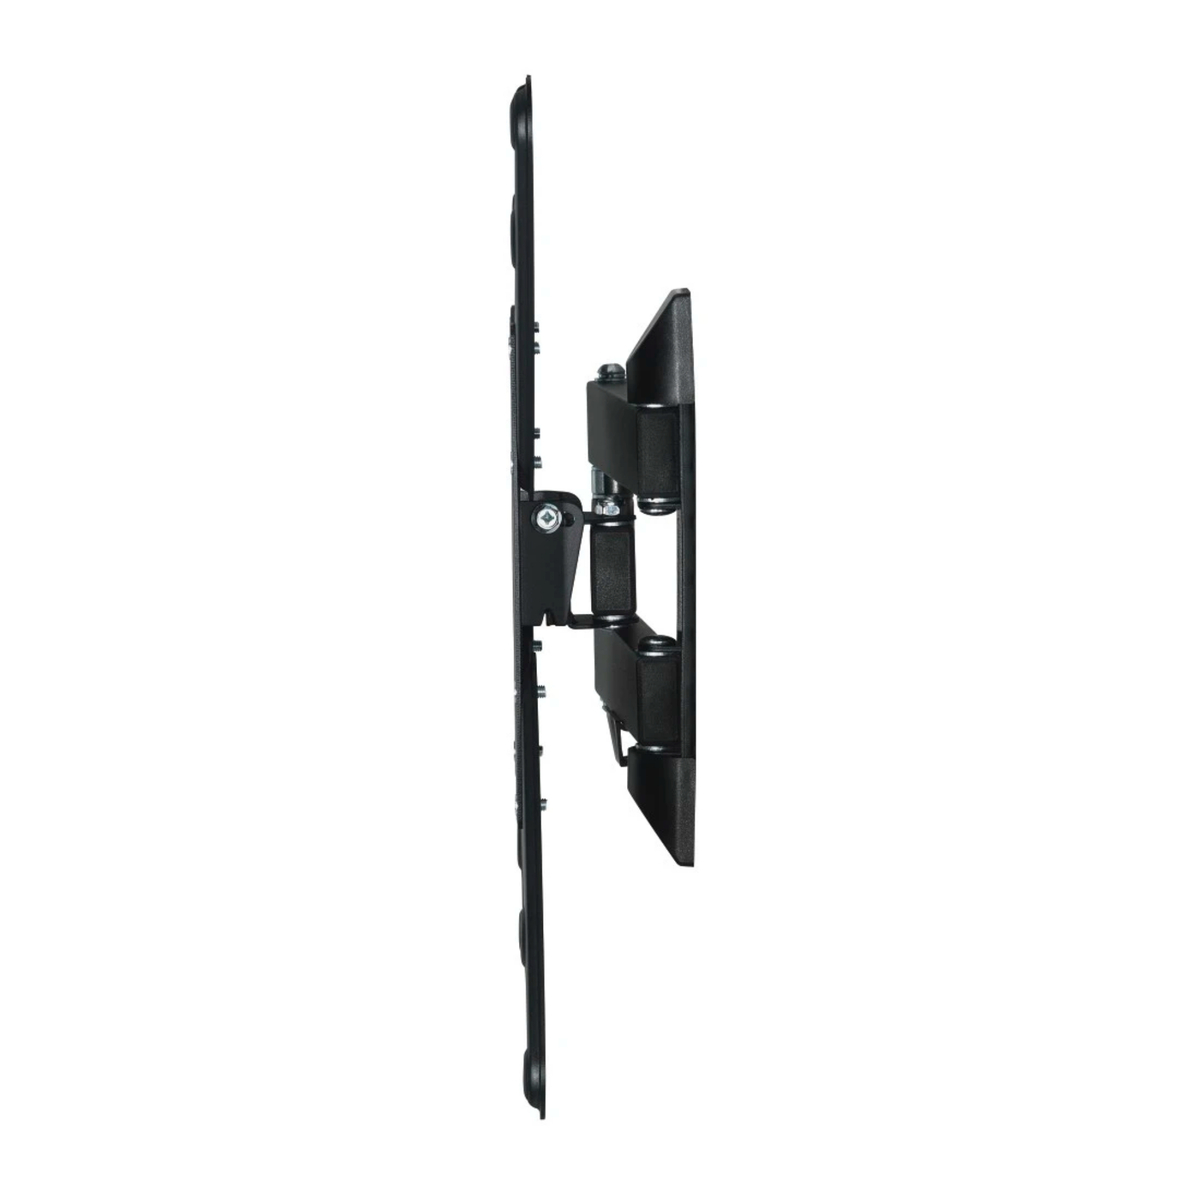 Hama Fullmotion TV Wall Bracket, 32-55 inches, 2 Arms, 400 x 400, Black, 00118103